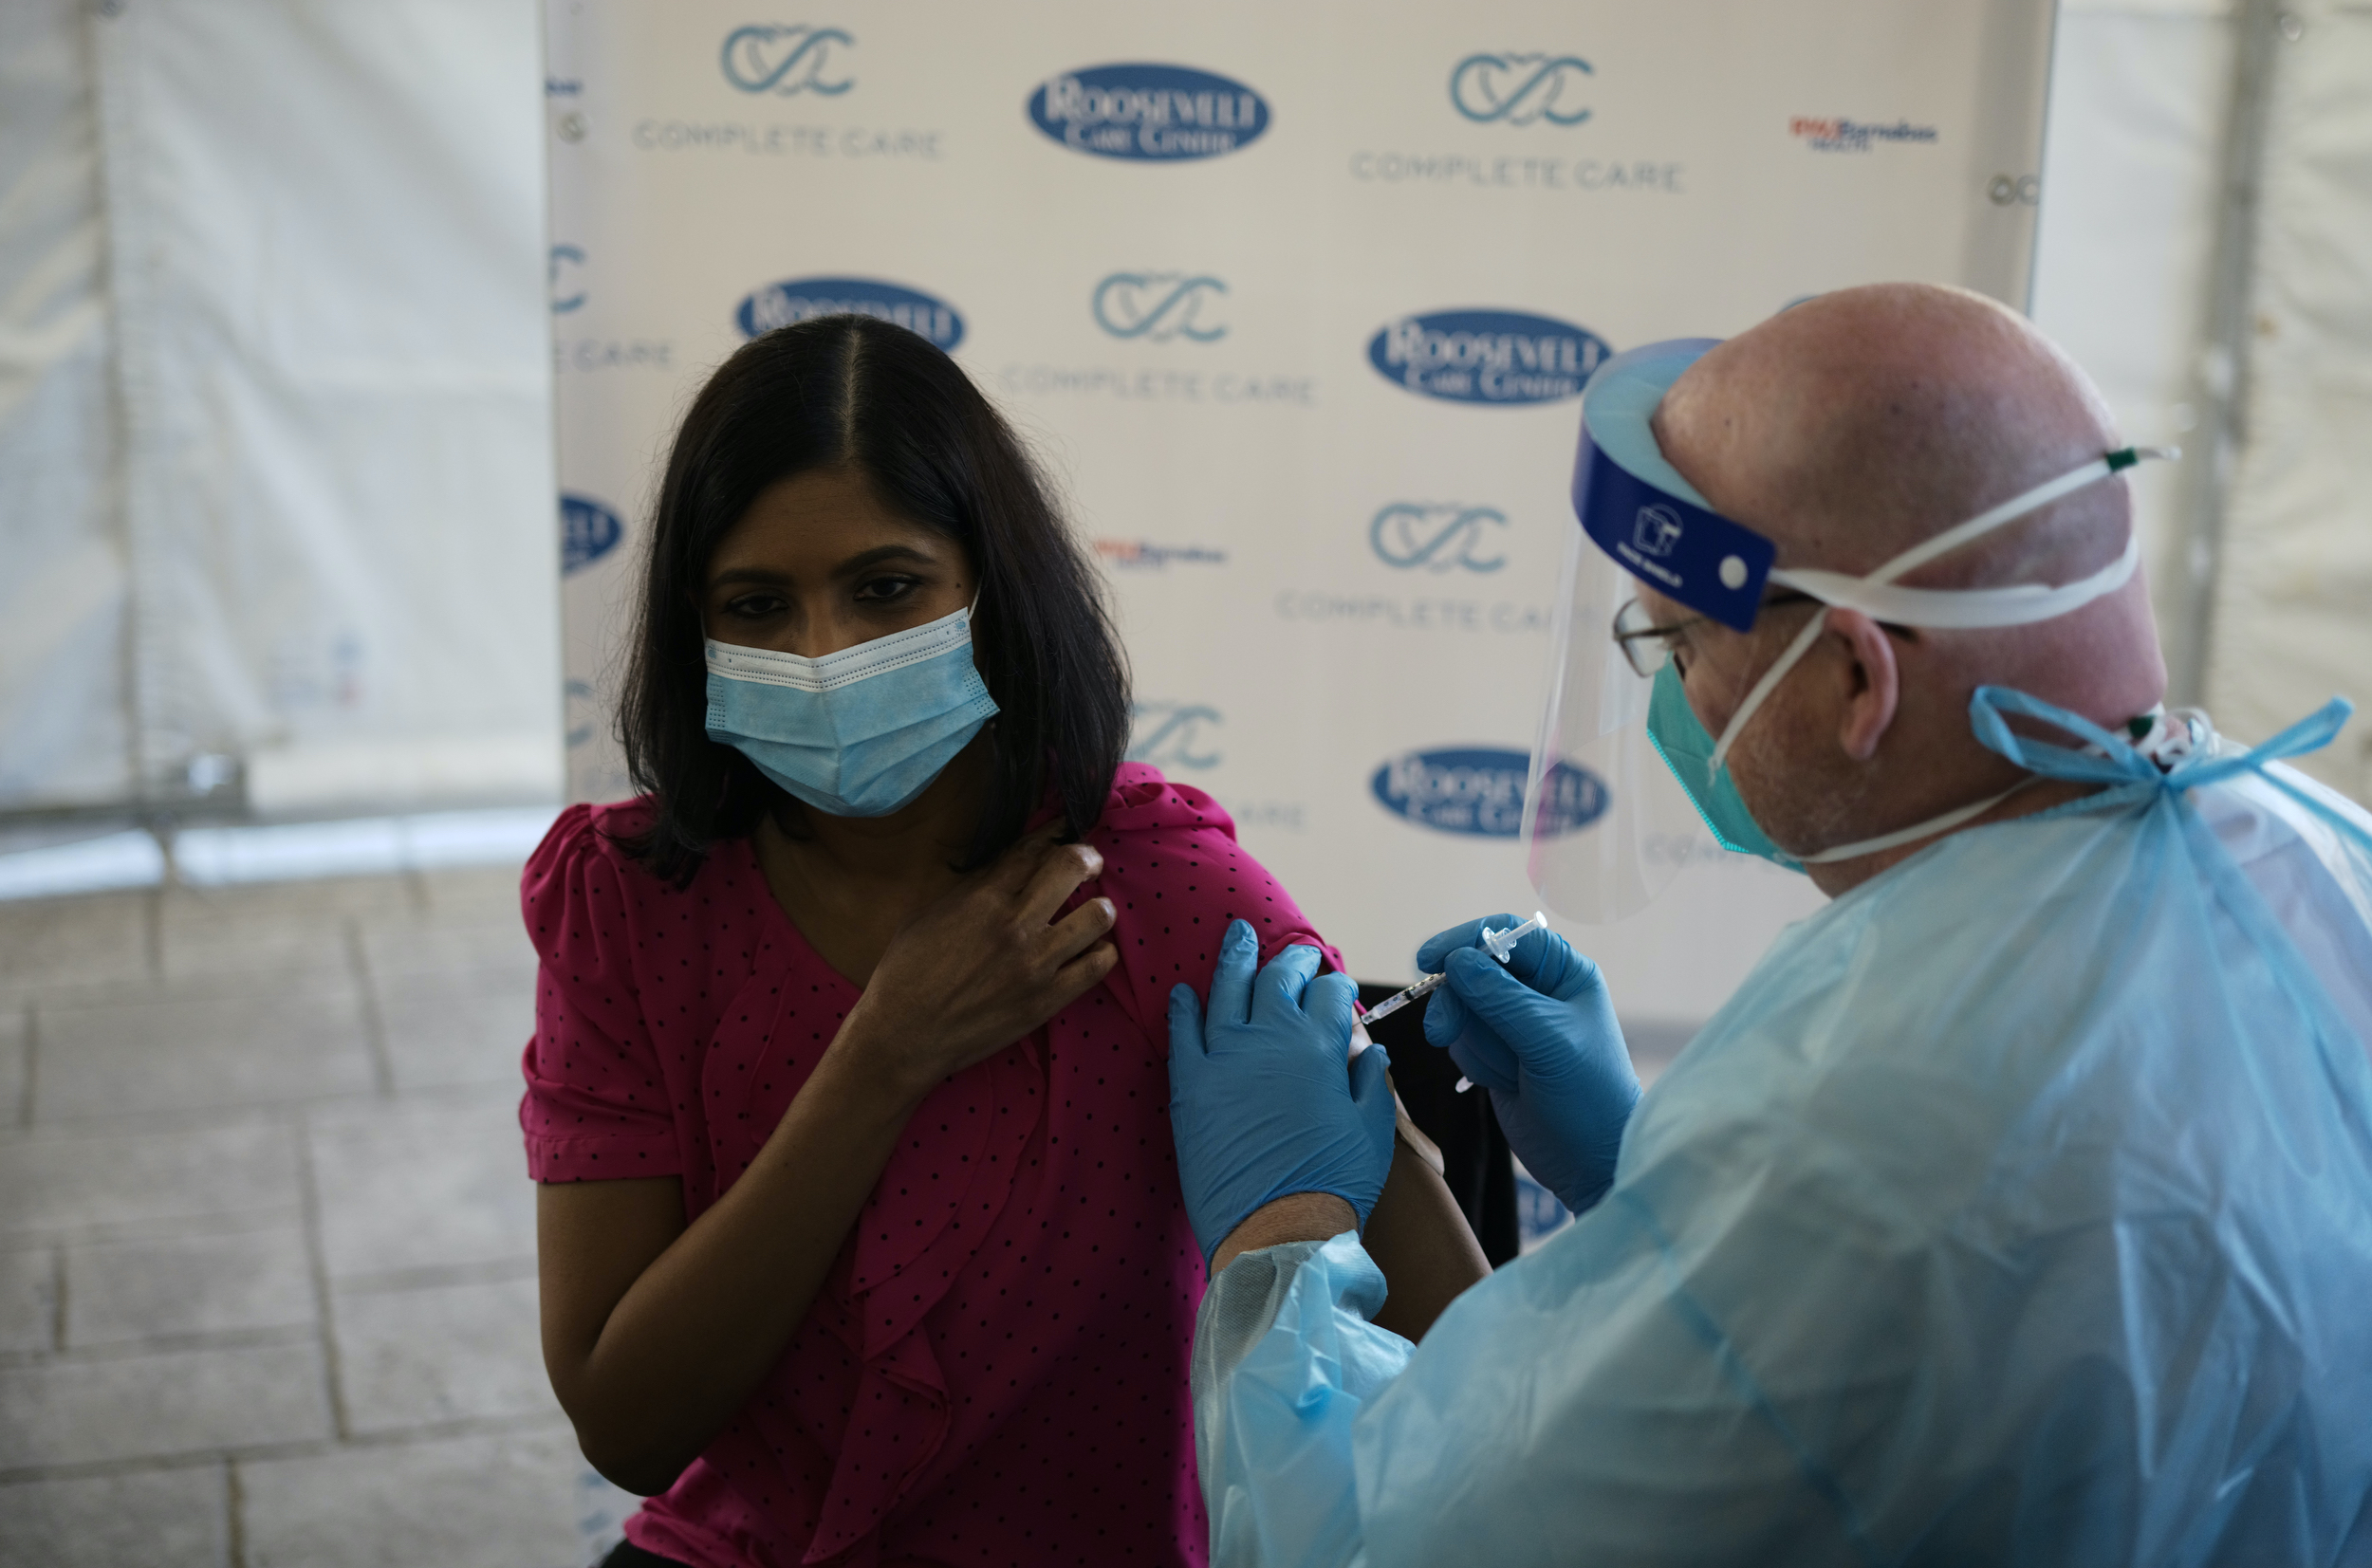 Woman in mask receives covid-19 vaccine from man in mask, hospital smock, and face shield.